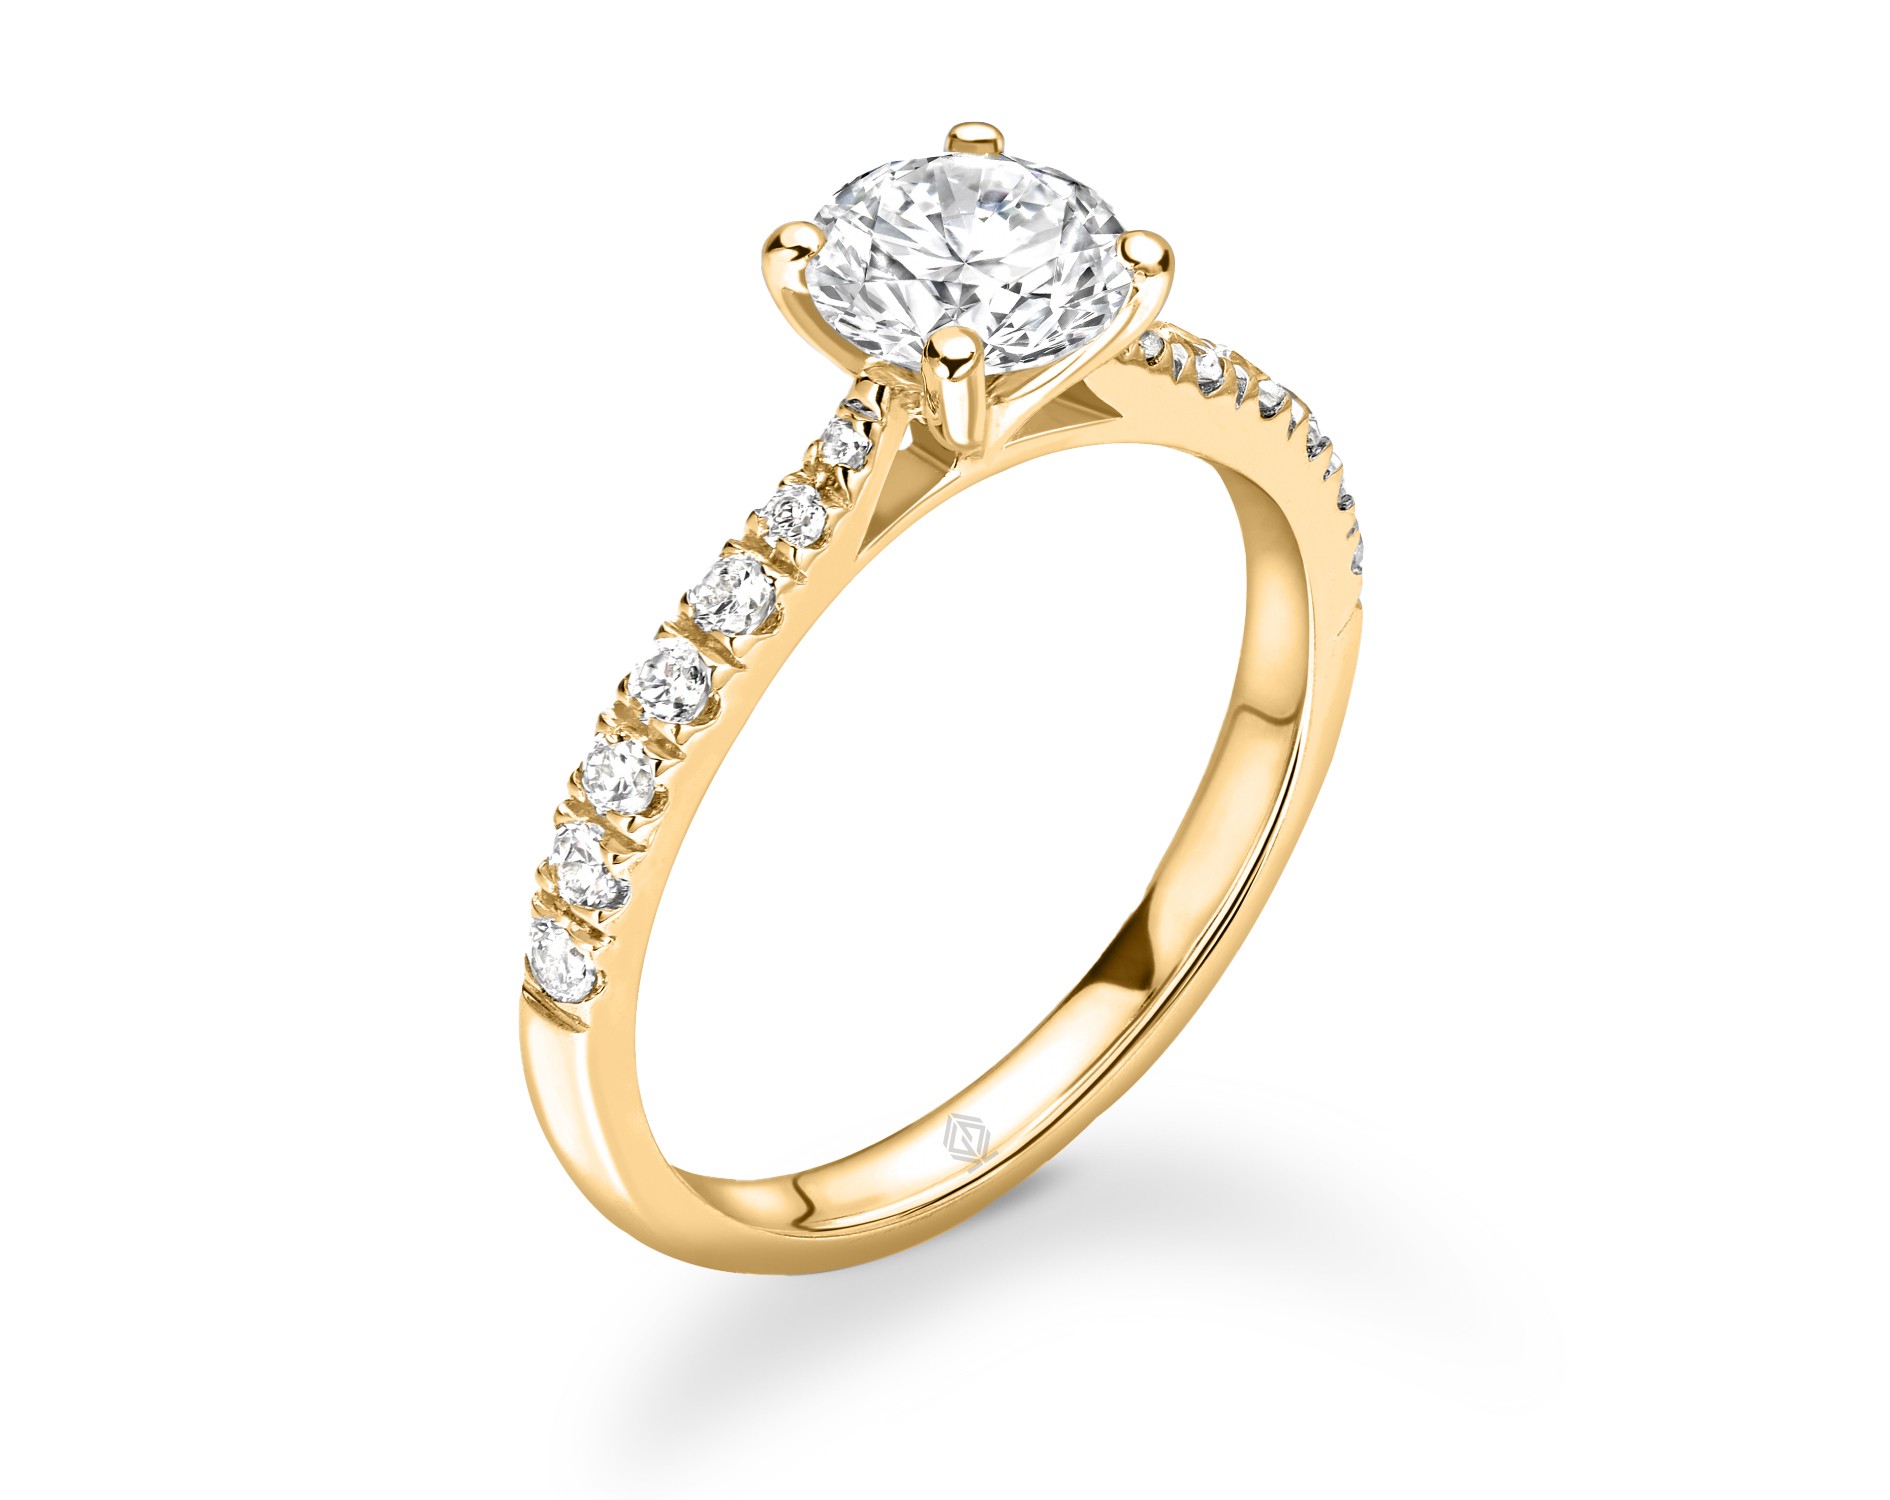 18K YELLOW GOLD 4 PRONGS ROUND CUT DIAMOND ENGAGEMENT RING WITH SIDE STONES IN PAVE SET